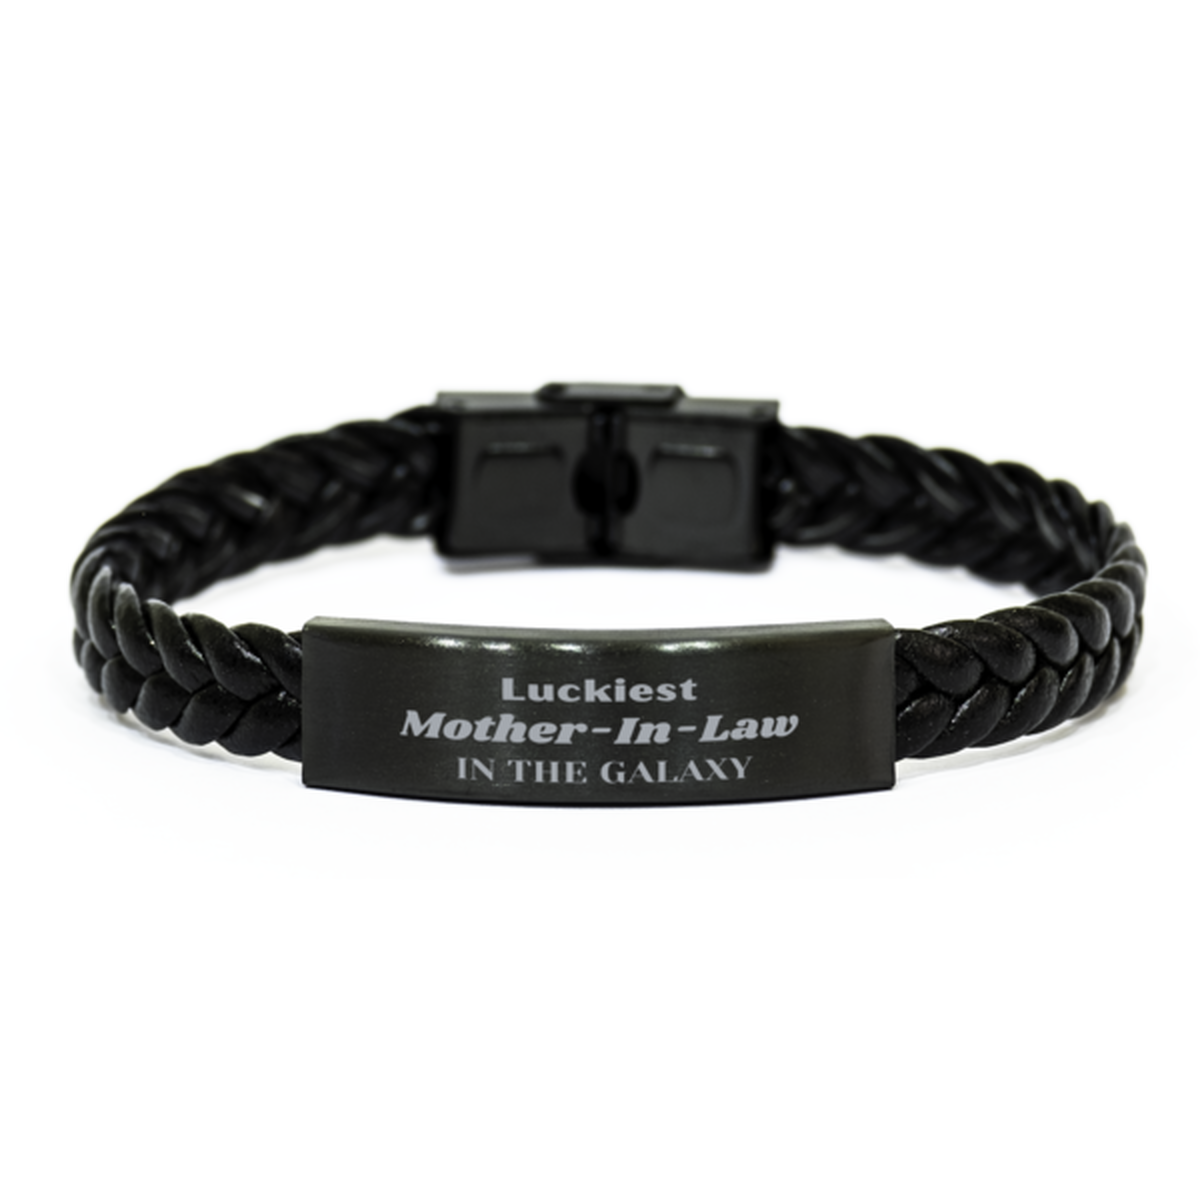 Luckiest Mother-In-Law in the Galaxy, To My Mother-In-Law Engraved Gifts, Christmas Mother-In-Law Braided Leather Bracelet Gifts, X-mas Birthday Unique Gifts For Mother-In-Law Men Women